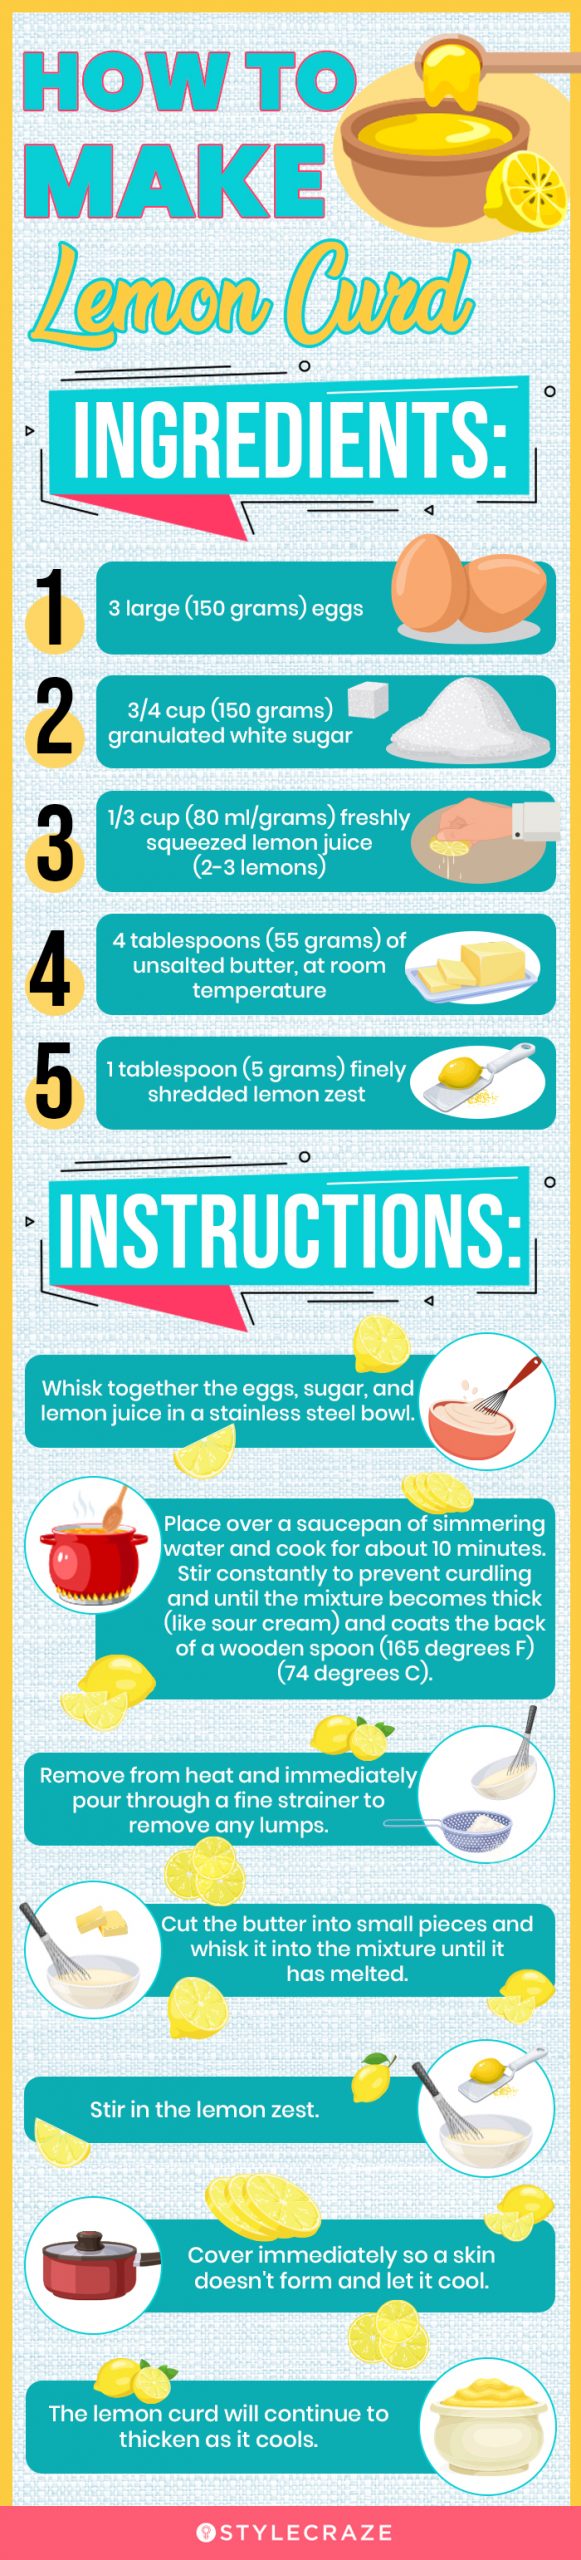 how to make lemon curd (infographic)